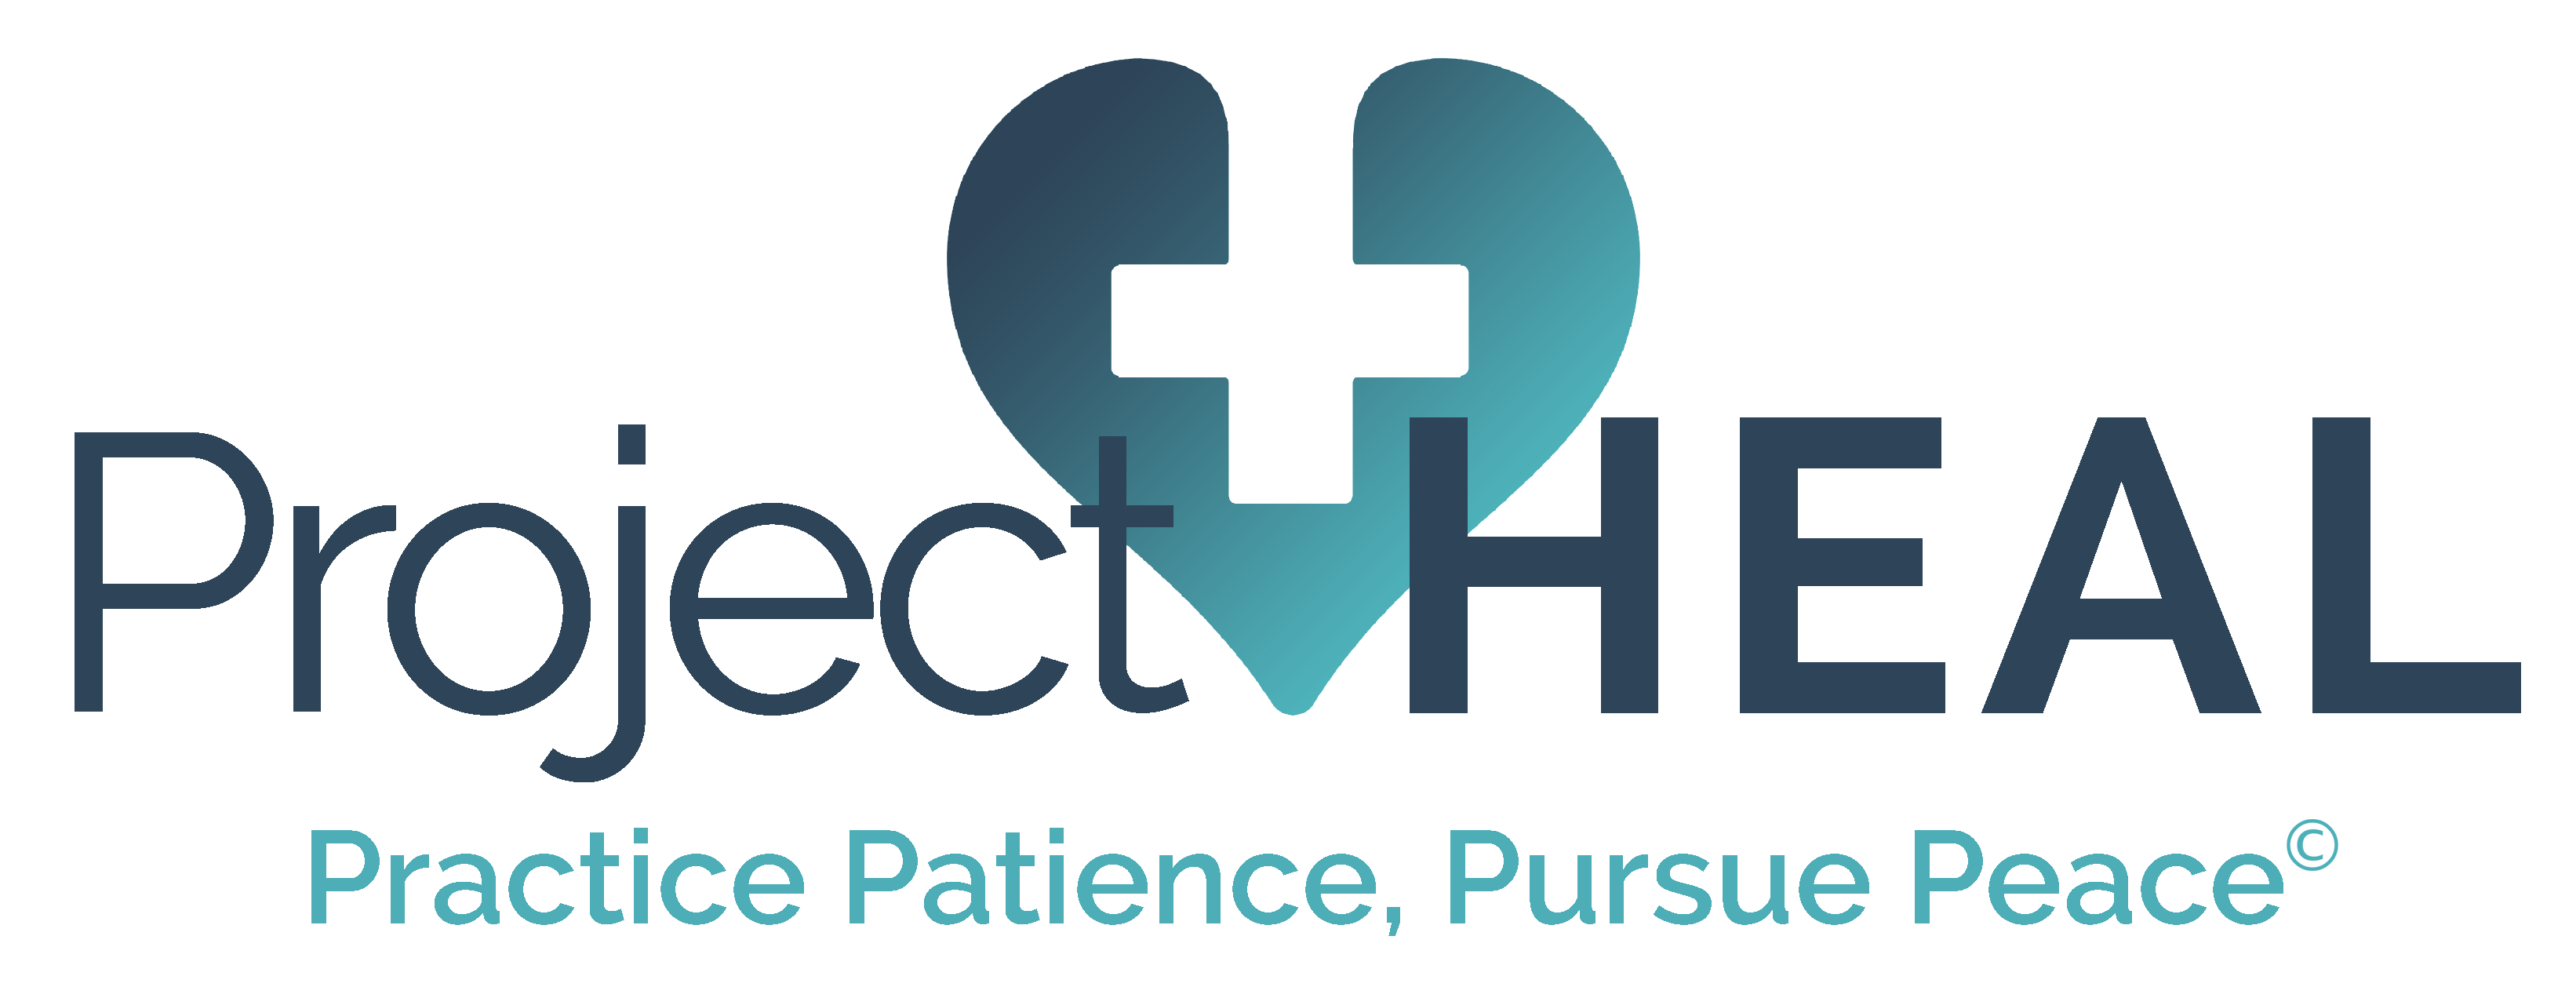 Project HEAL logo with heart and cross and "Practice patience. Pursue peace" underneath